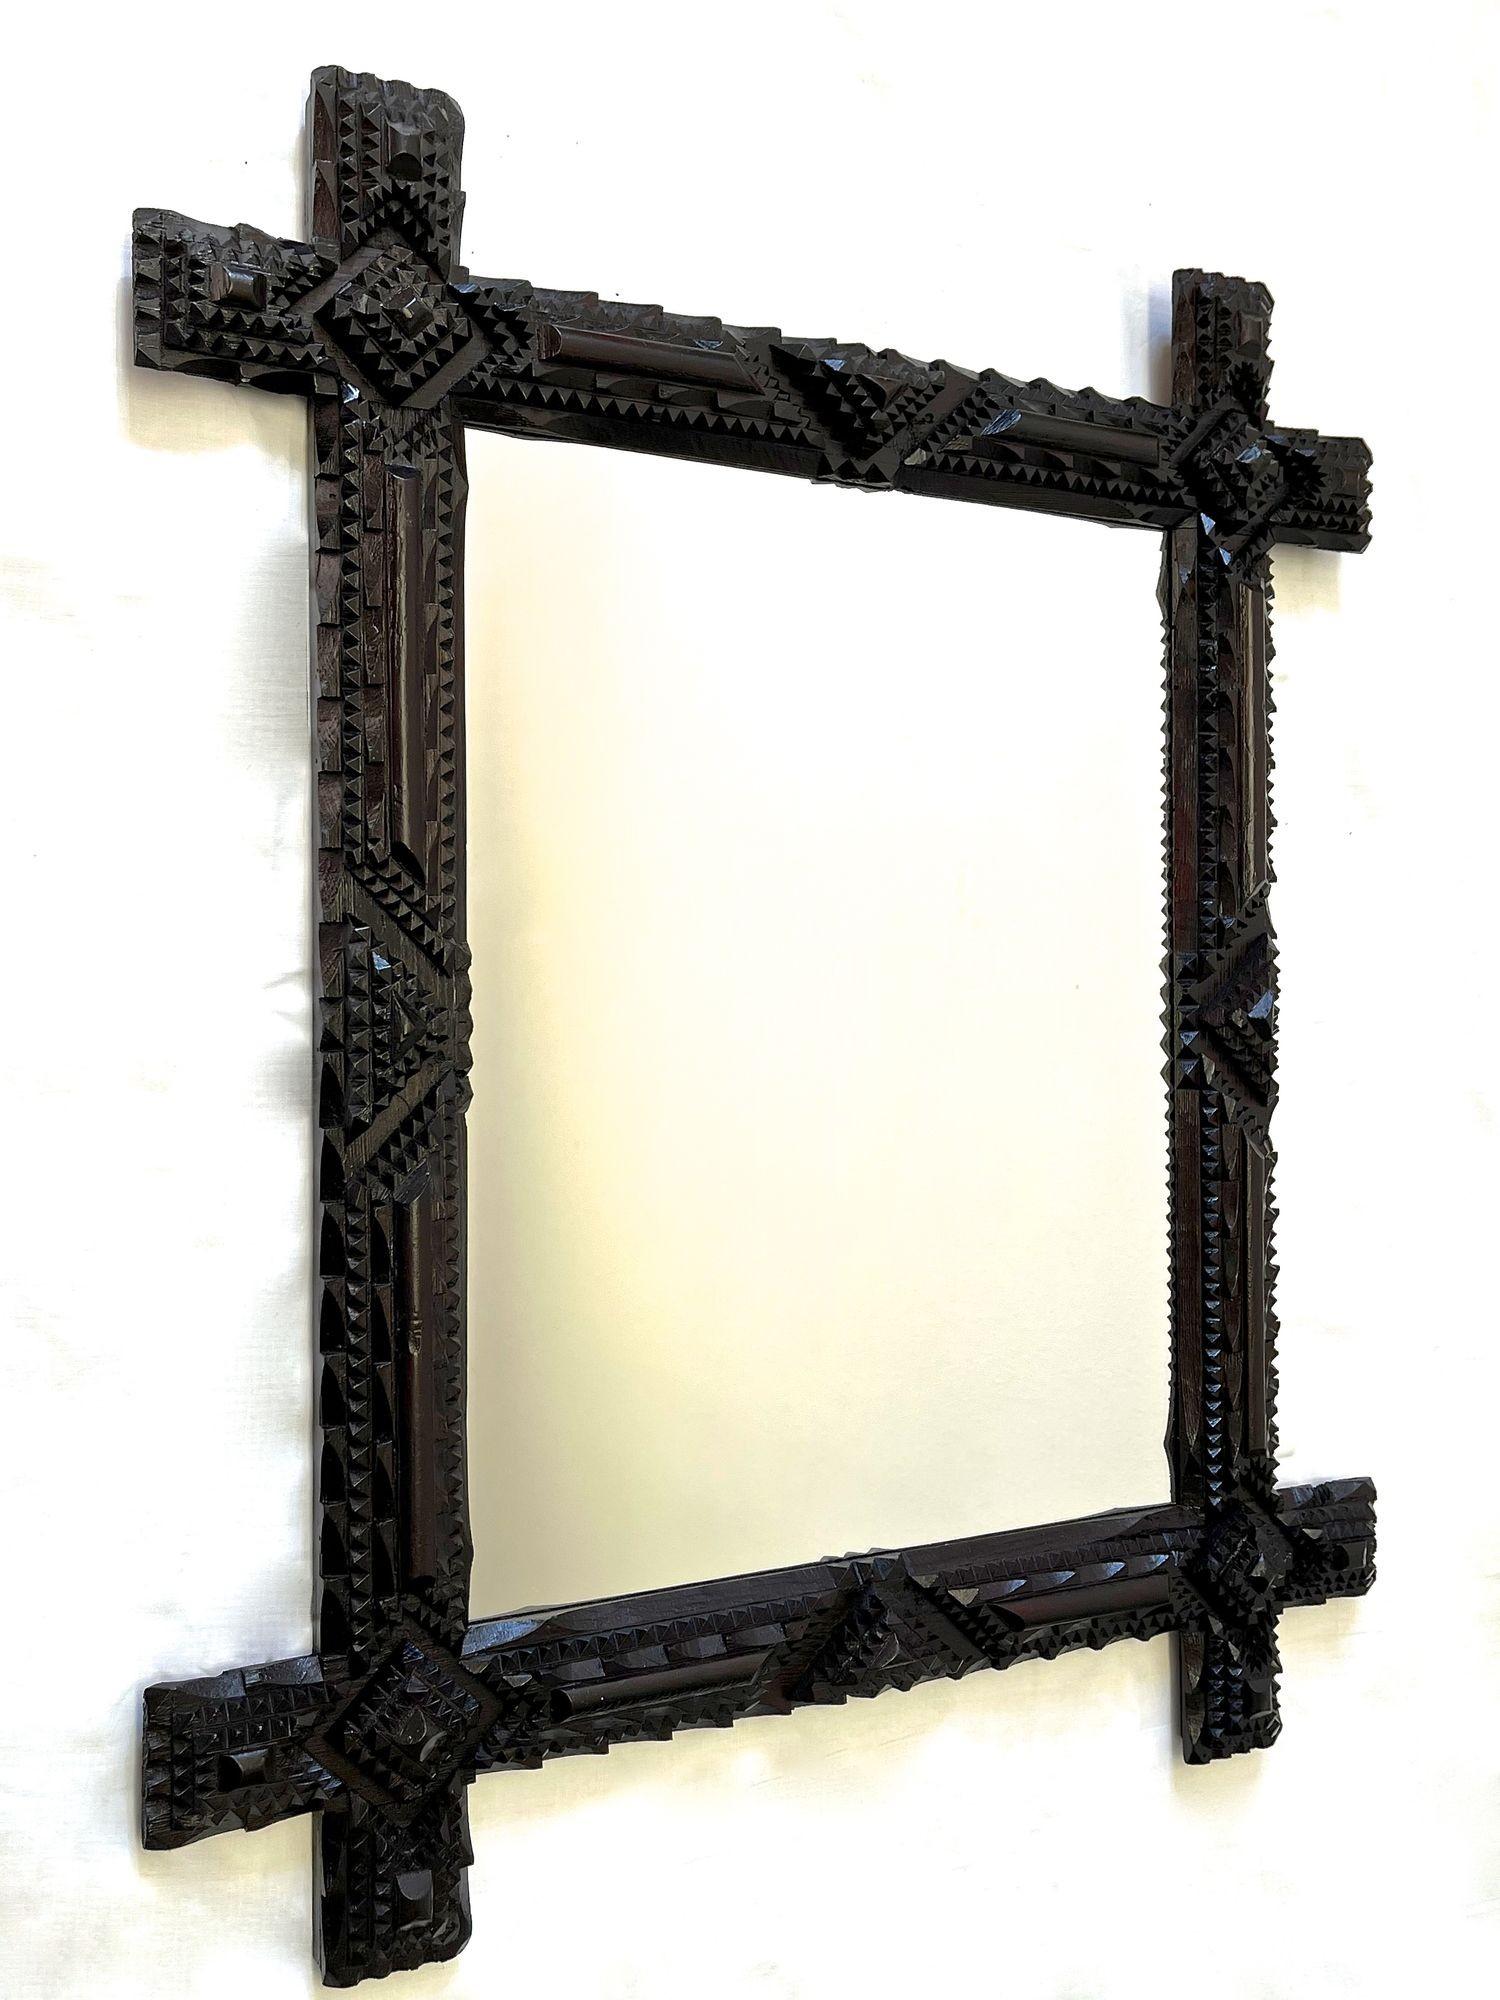 One of a kind handcarved Tramp Art wall mirror from the late 19th century in Austria. This elaborately made rustic mirror from around 1890 impresses with its fantastic set variety of different carvings. The resulting, amazing looking patterns in